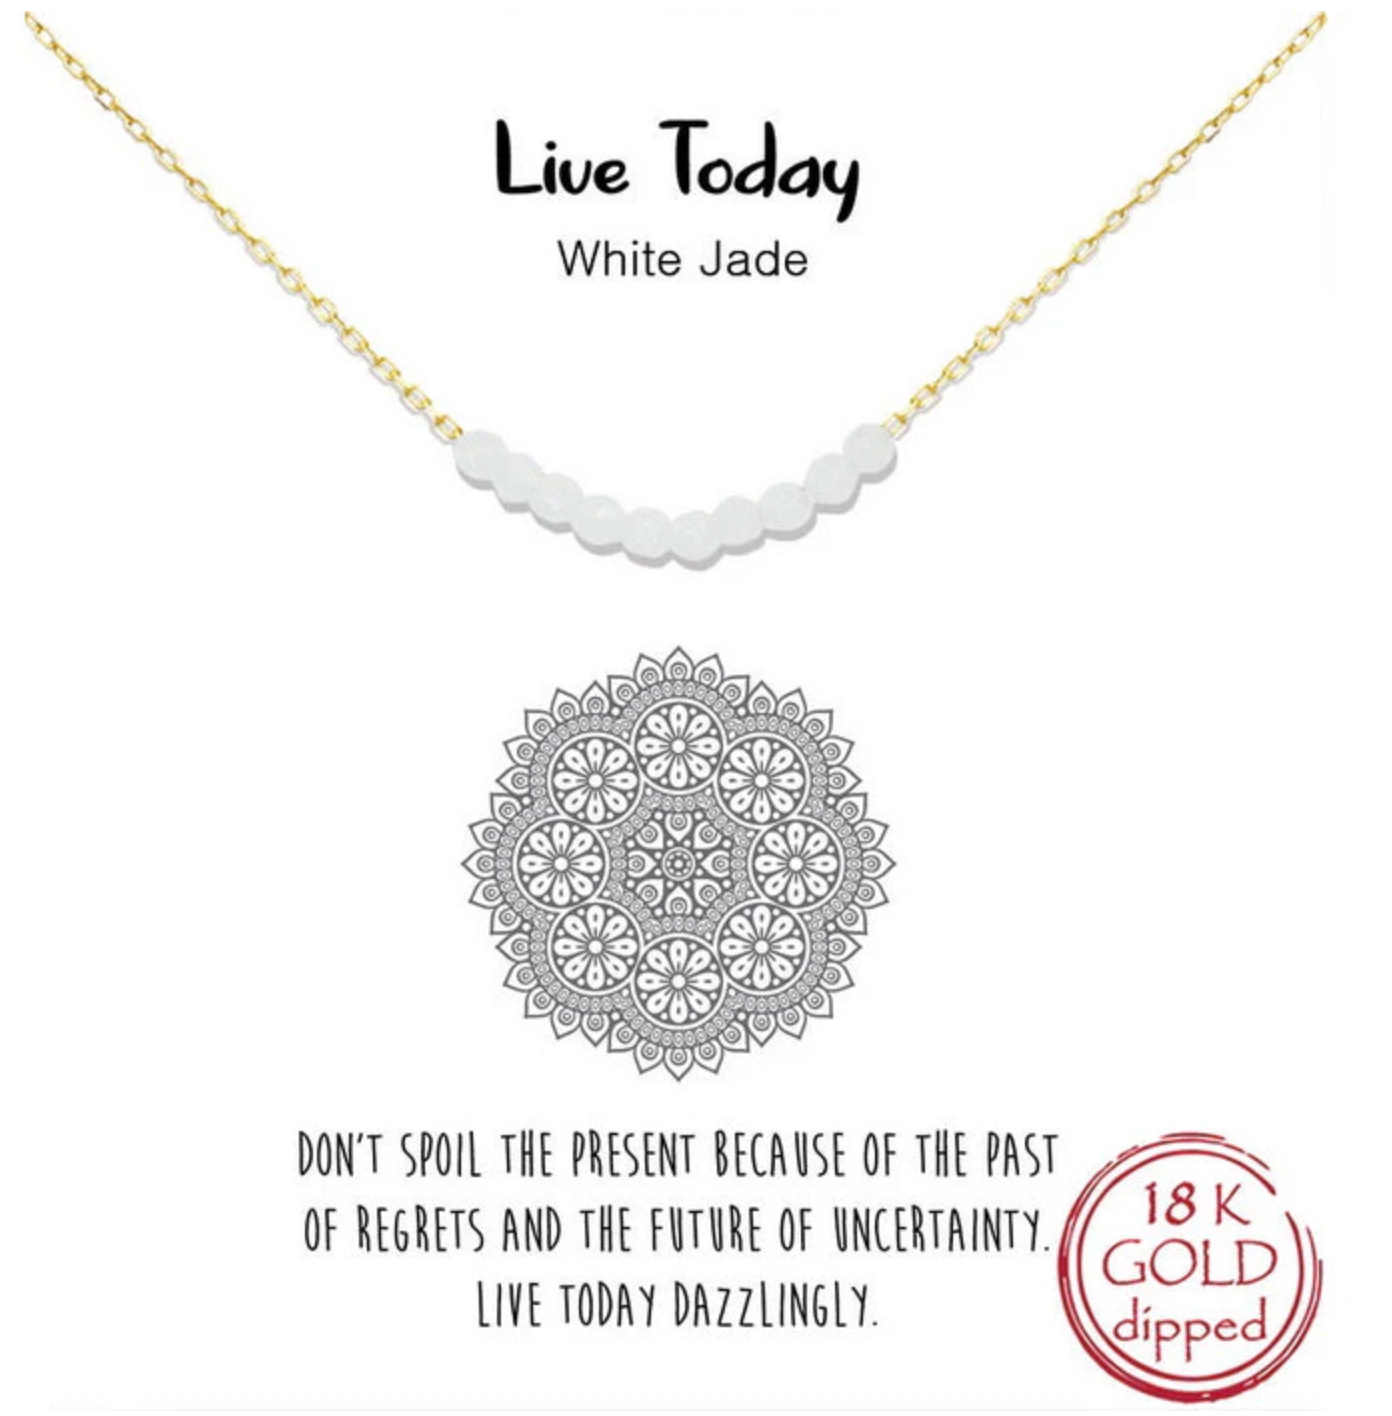 LIVE TODAY Natural Stone Bead Short Chain Necklace - White Jade